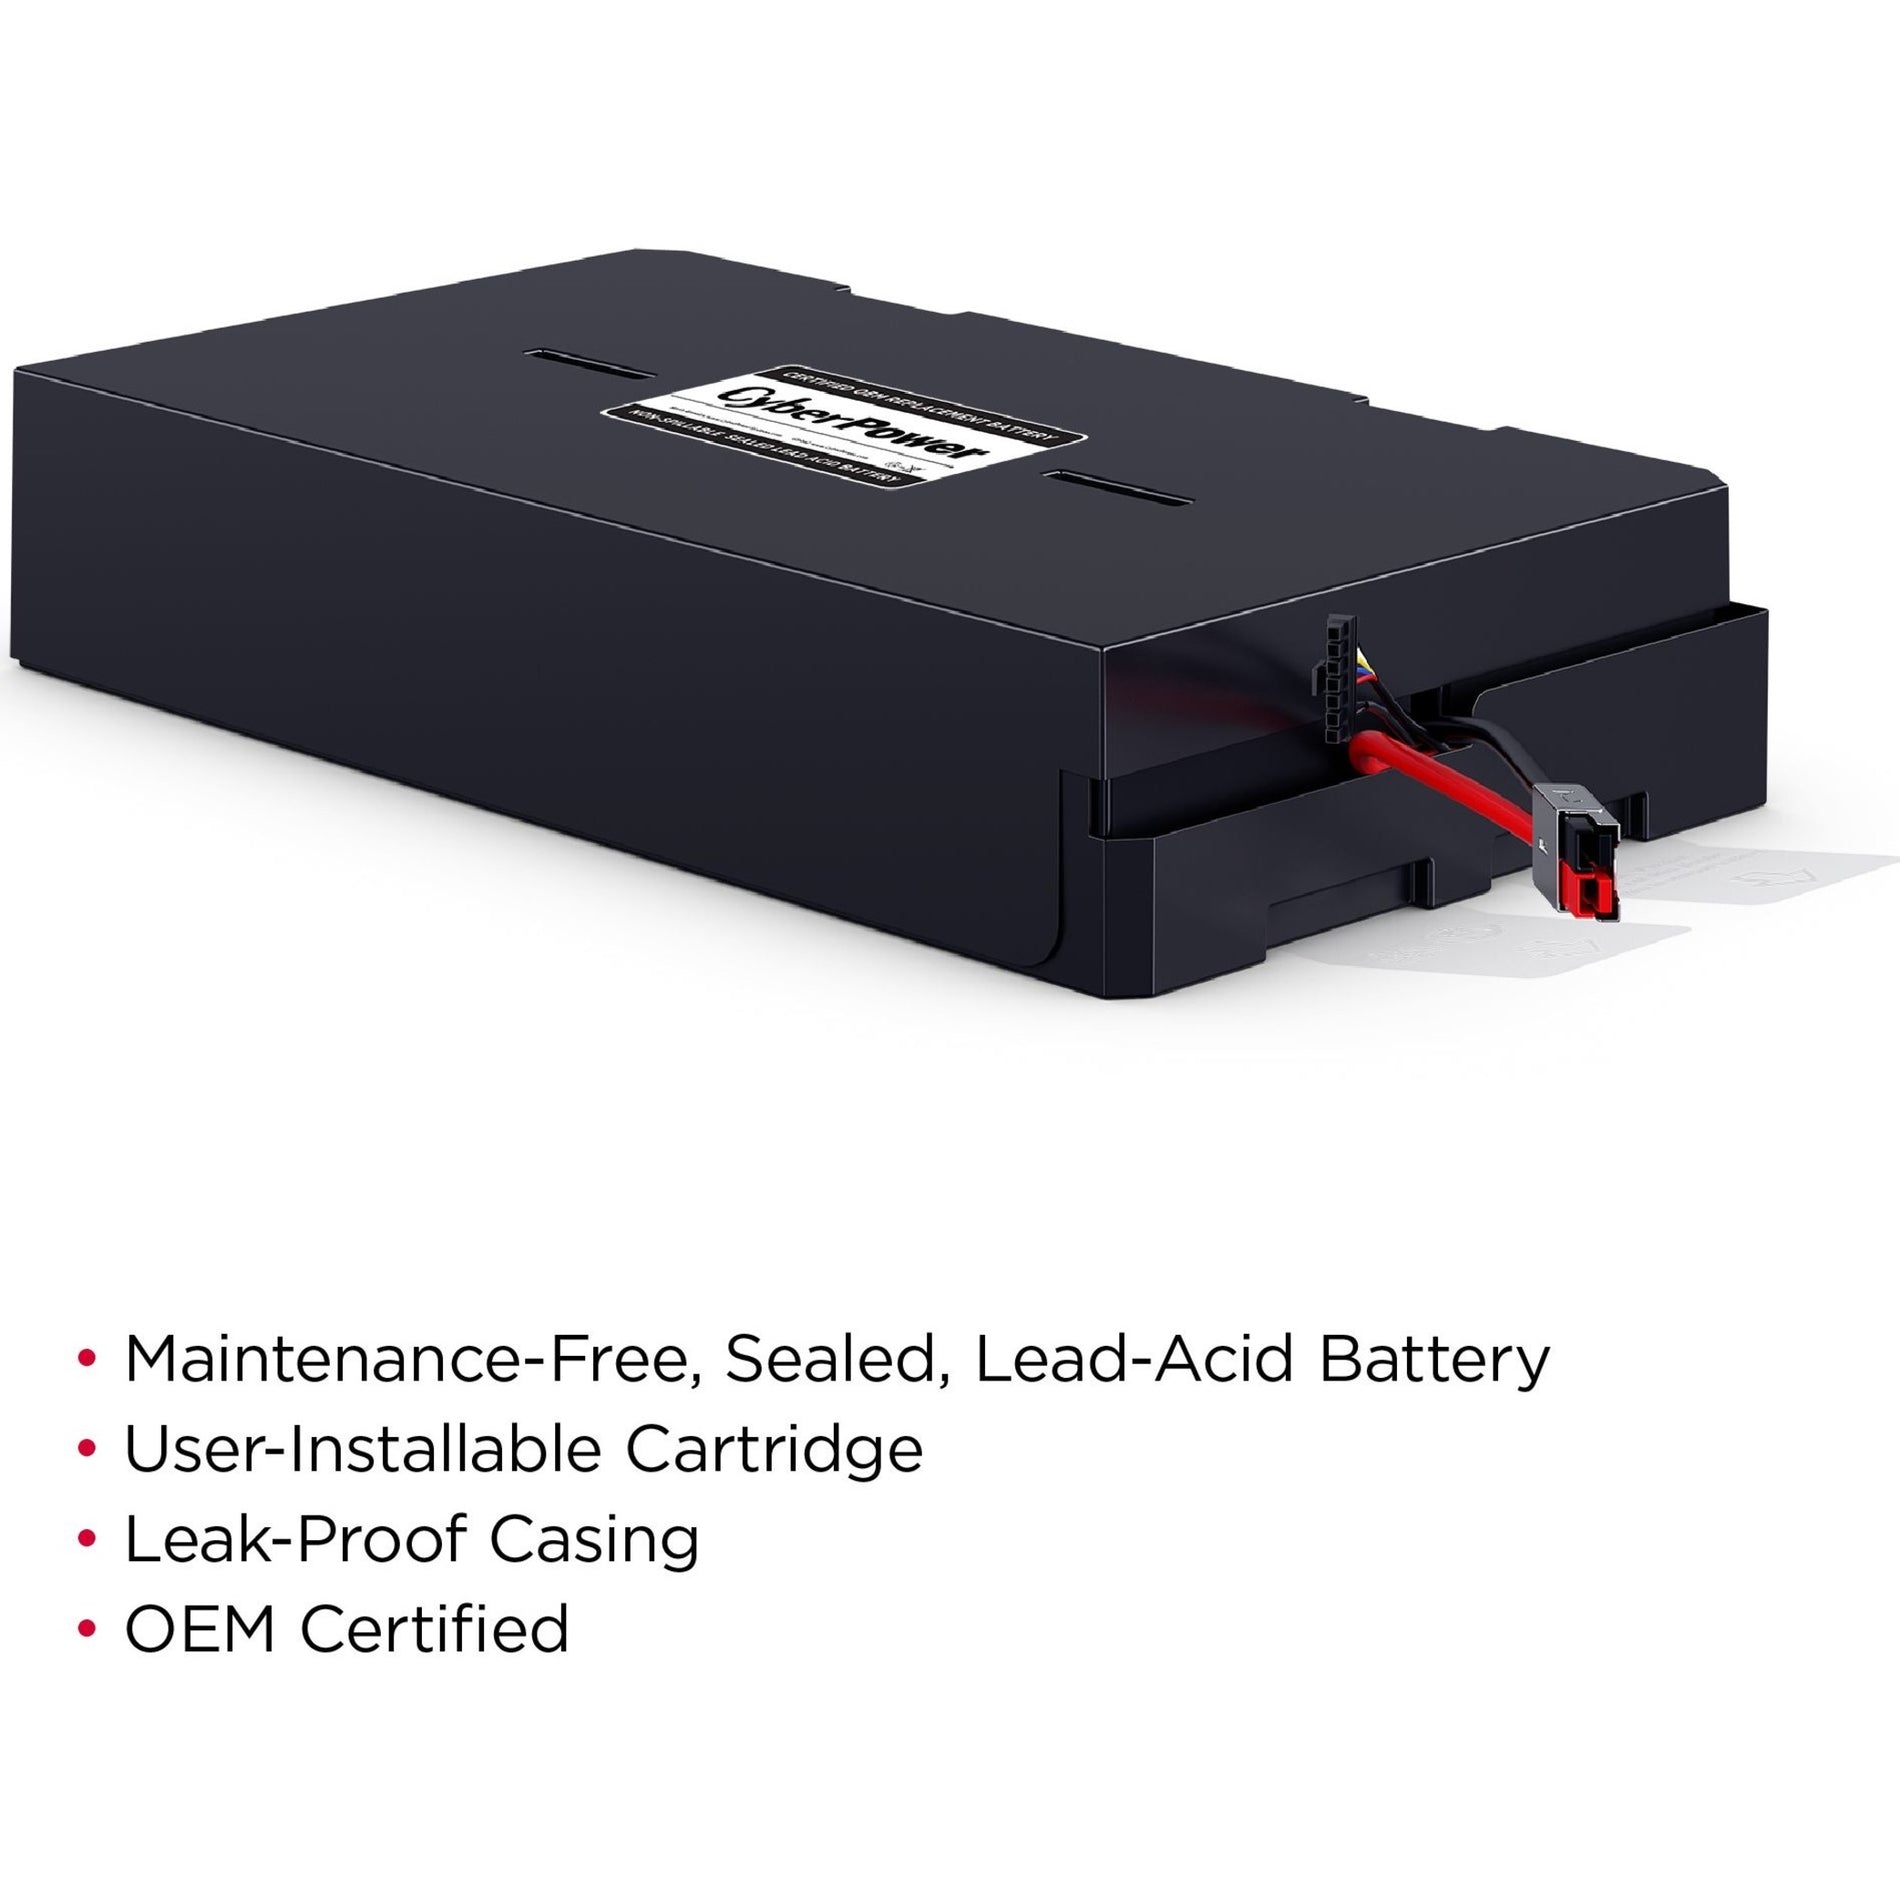 CyberPower RB1270X4H Battery Kit, 18 Month Limited Warranty, 7000mAh, Lead Acid